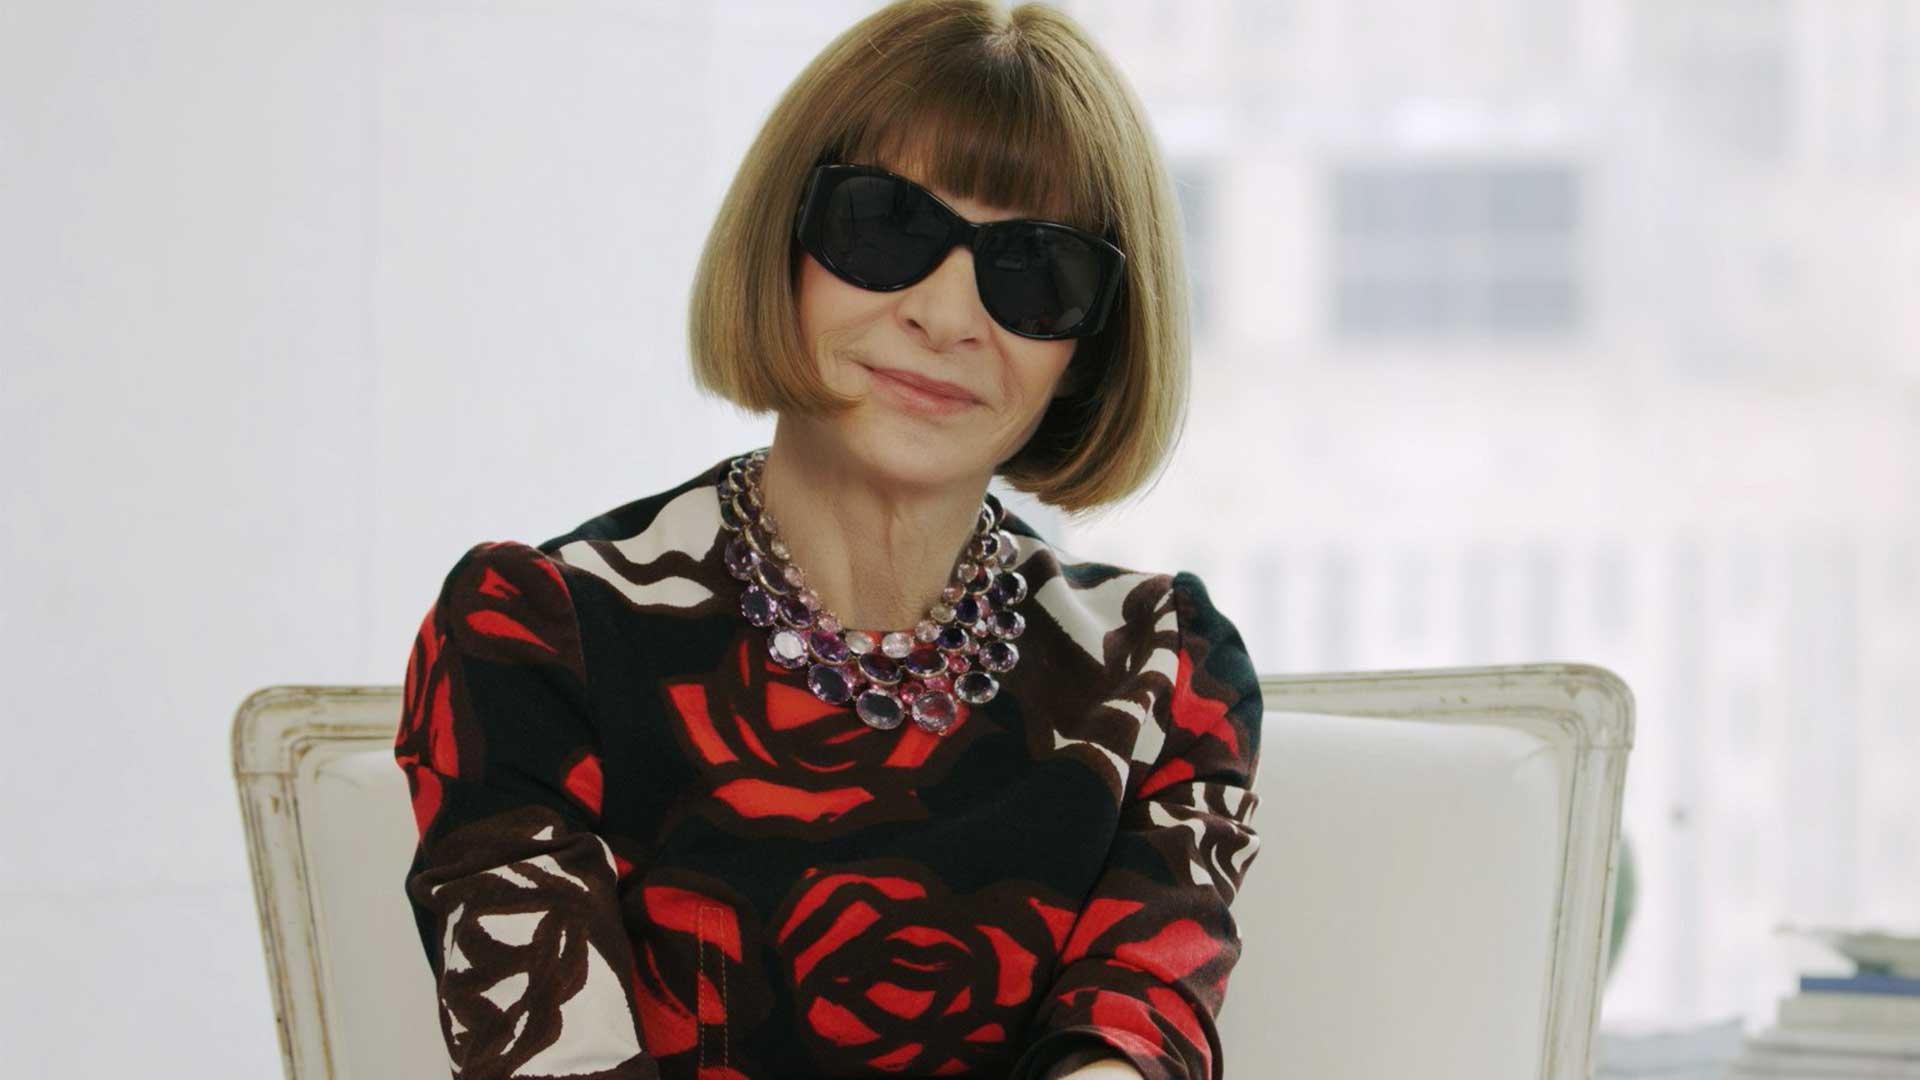 Anna Wintour: New York Fashion Week, Global Editorial Director at Vogue. 1920x1080 Full HD Background.